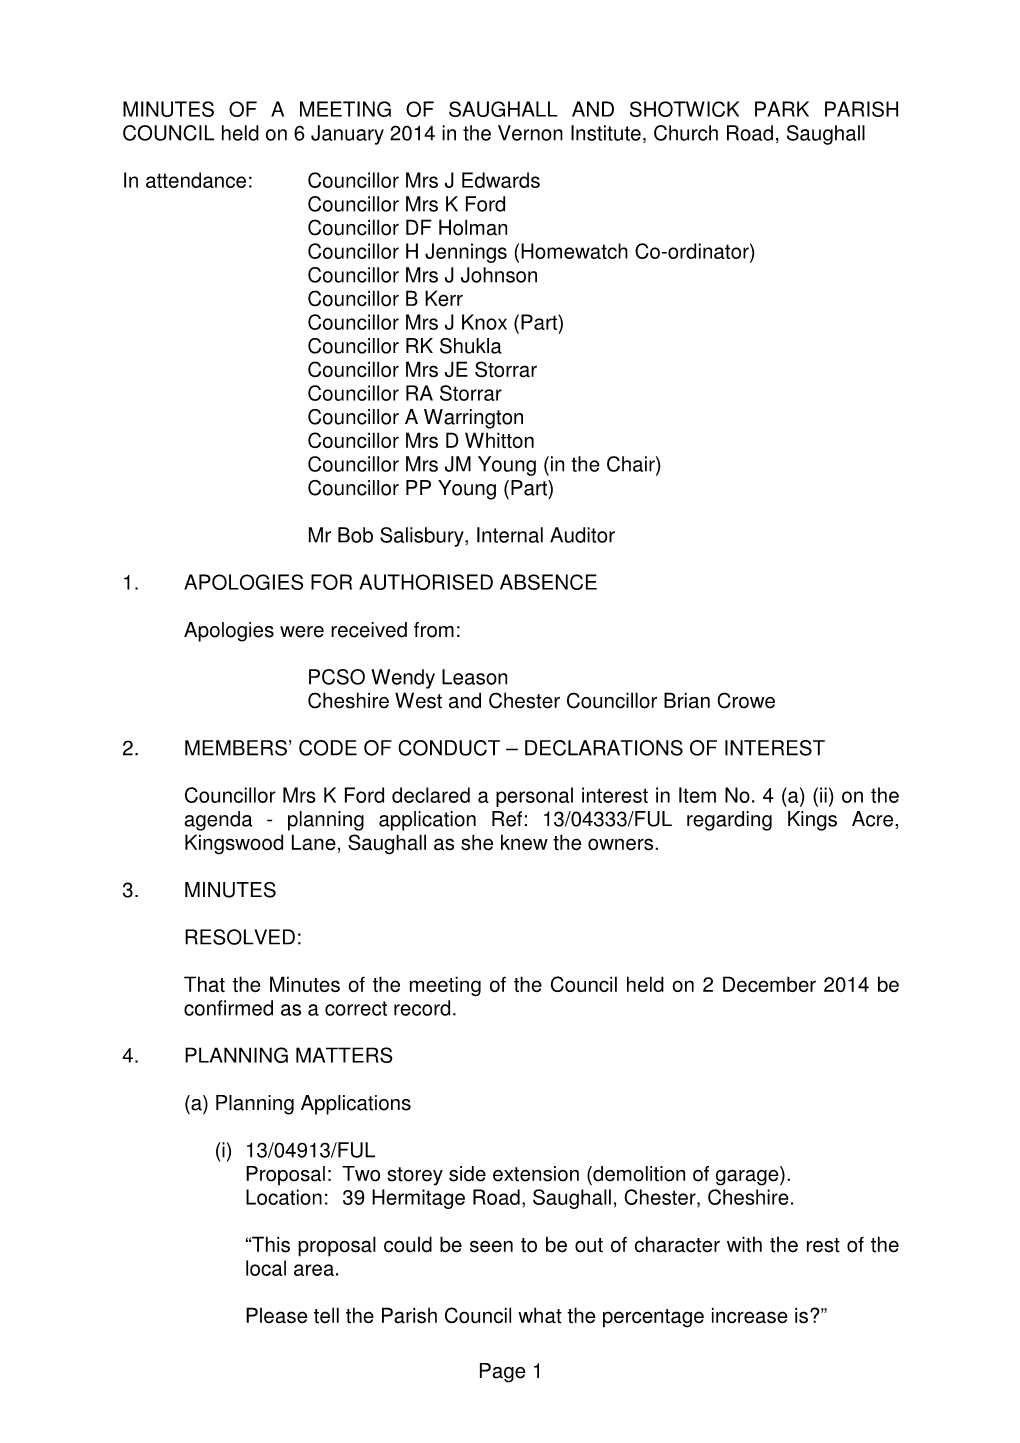 Page 1 MINUTES of a MEETING of SAUGHALL and SHOTWICK